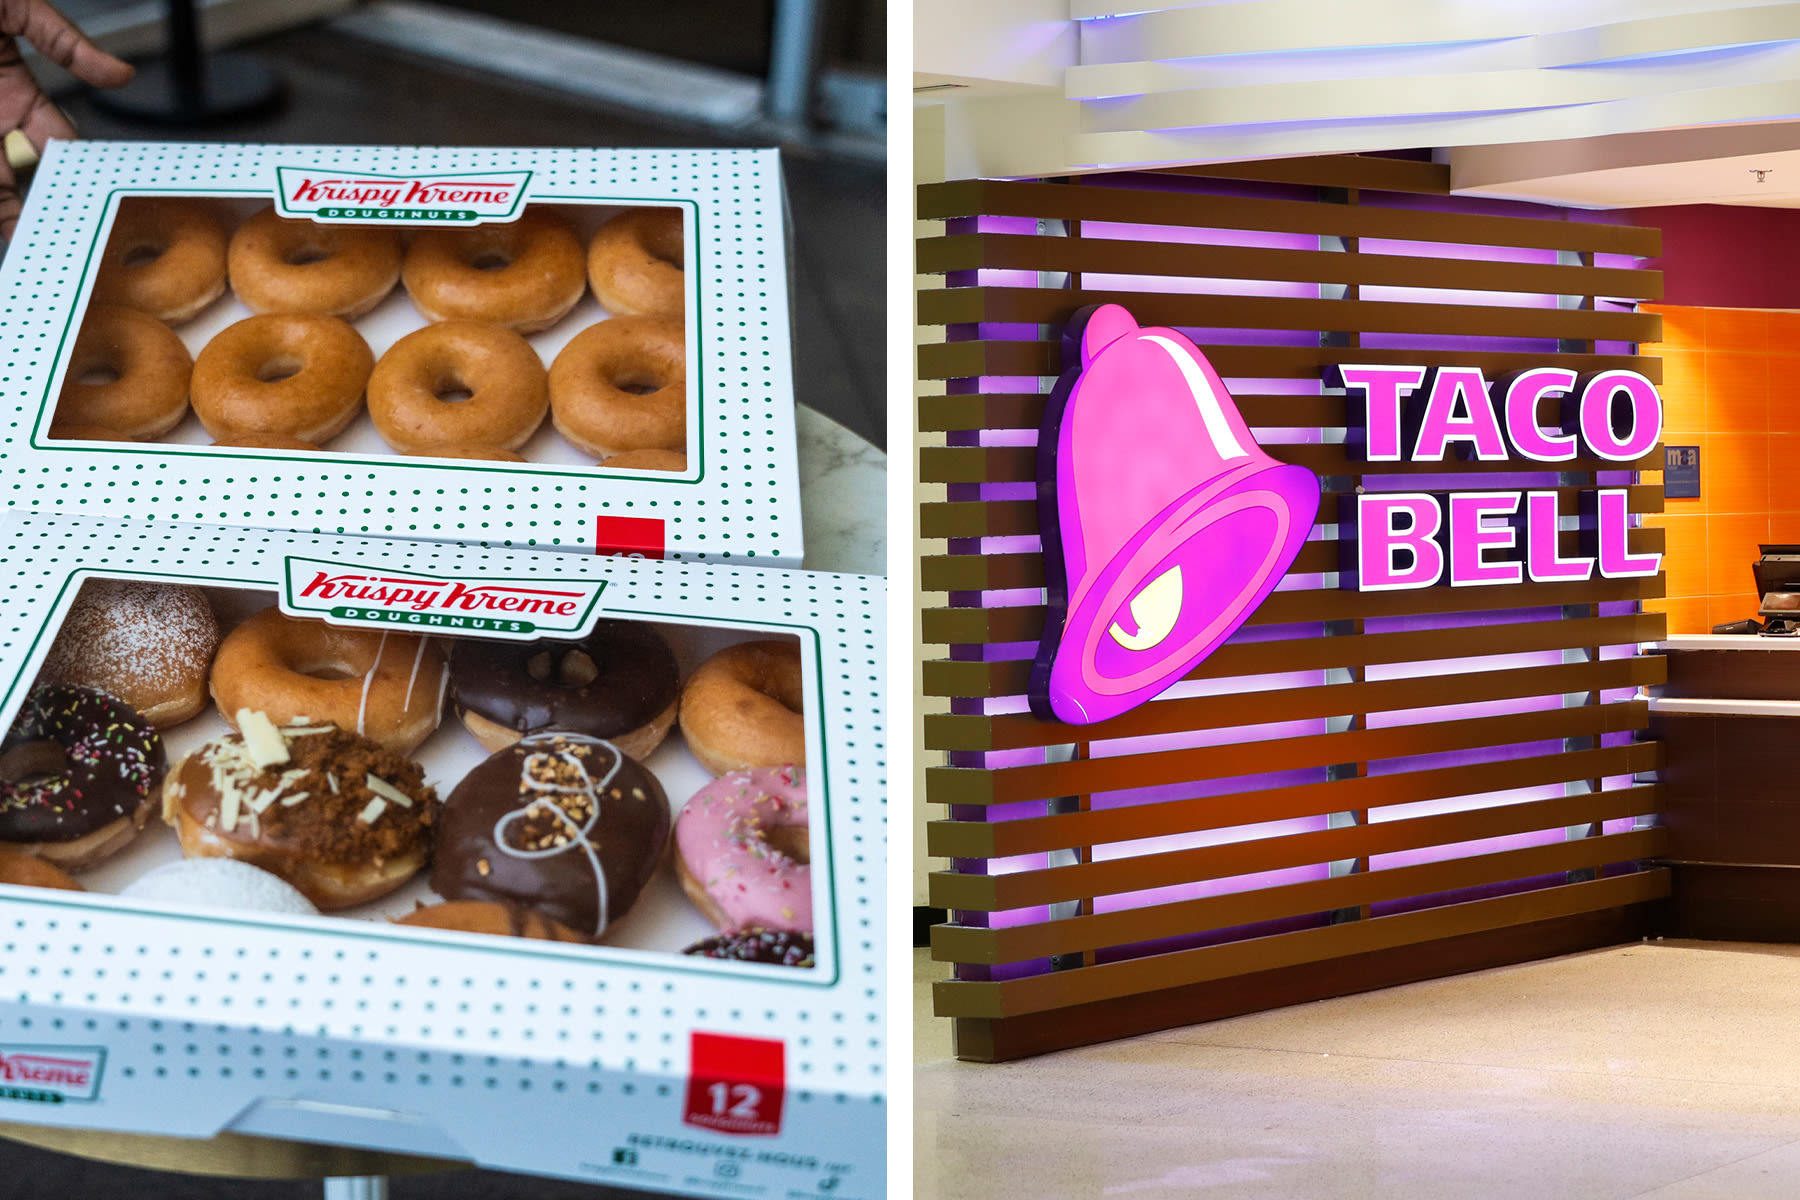 US chains Taco Bell and Krispy Kreme are coming to these German cities